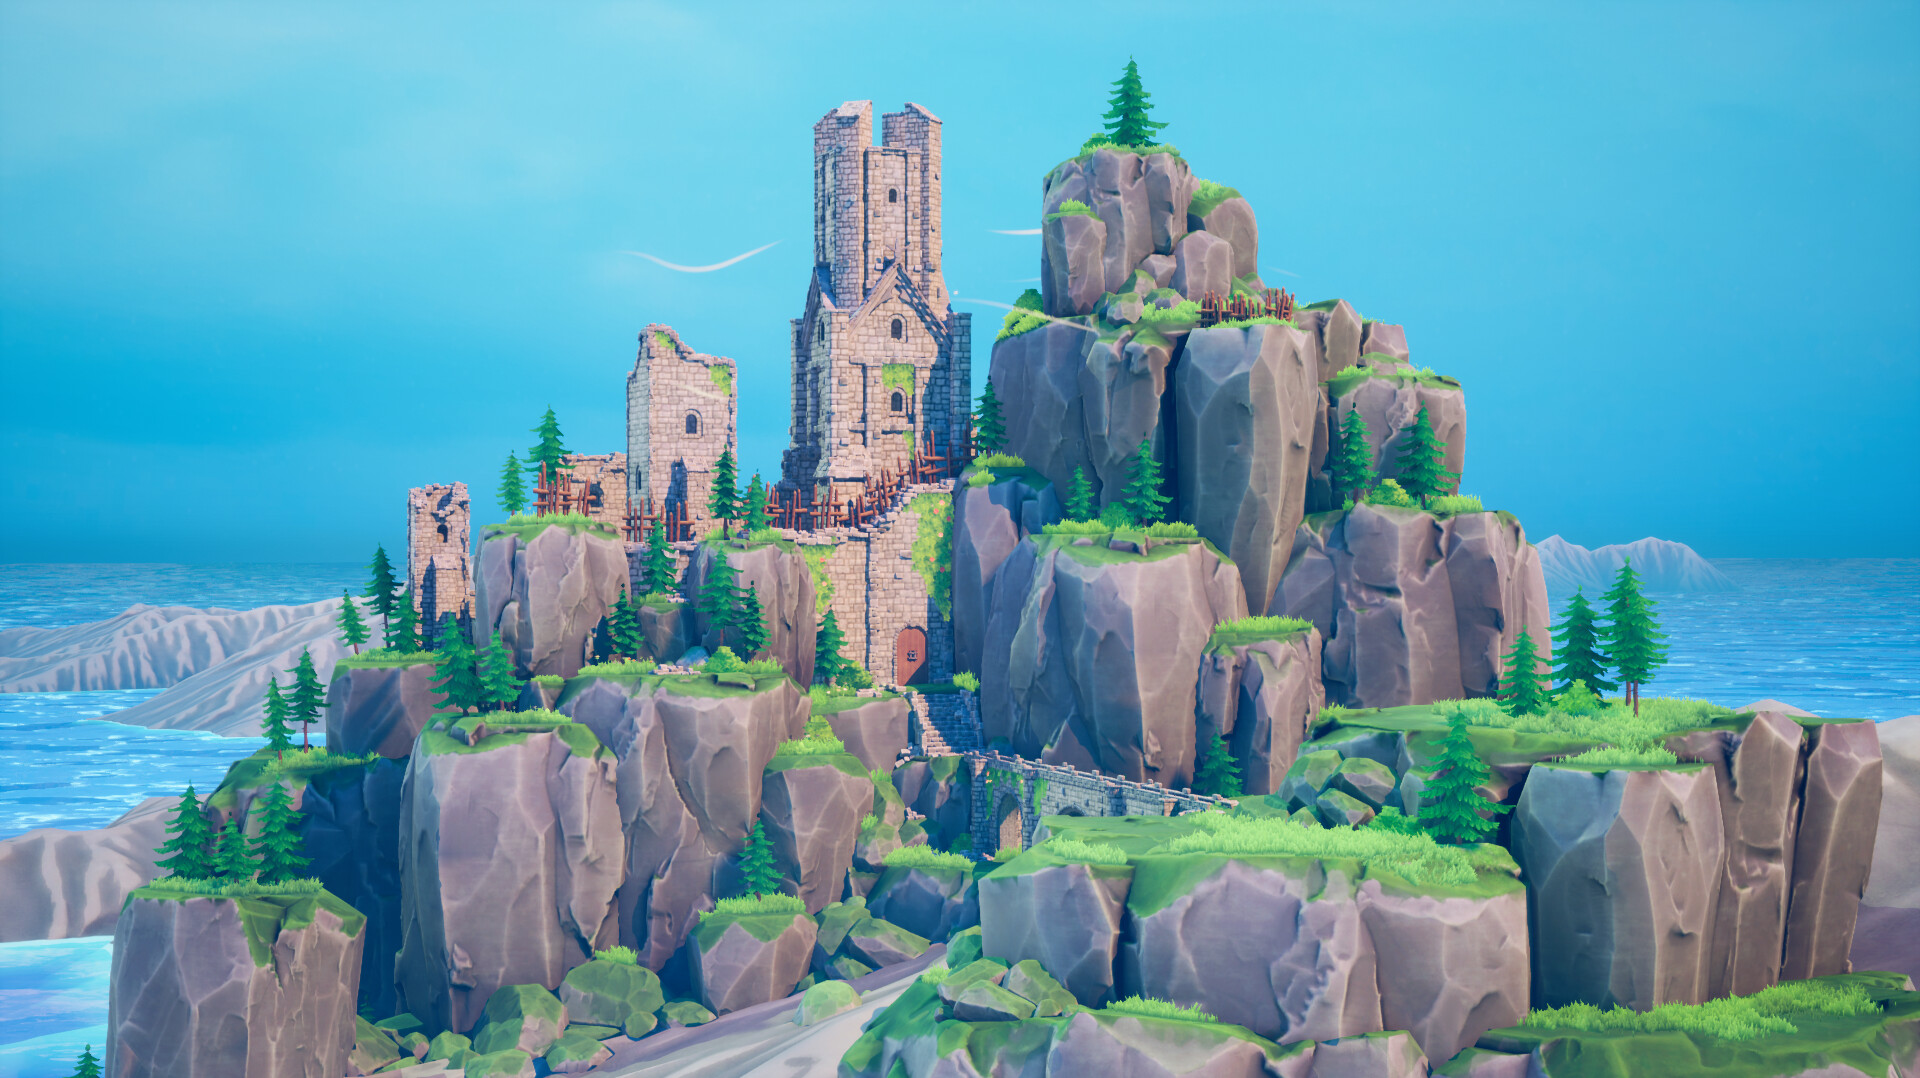 ArtStation - Castle In The Clouds - UE4 Stylized Environment & Technical Art